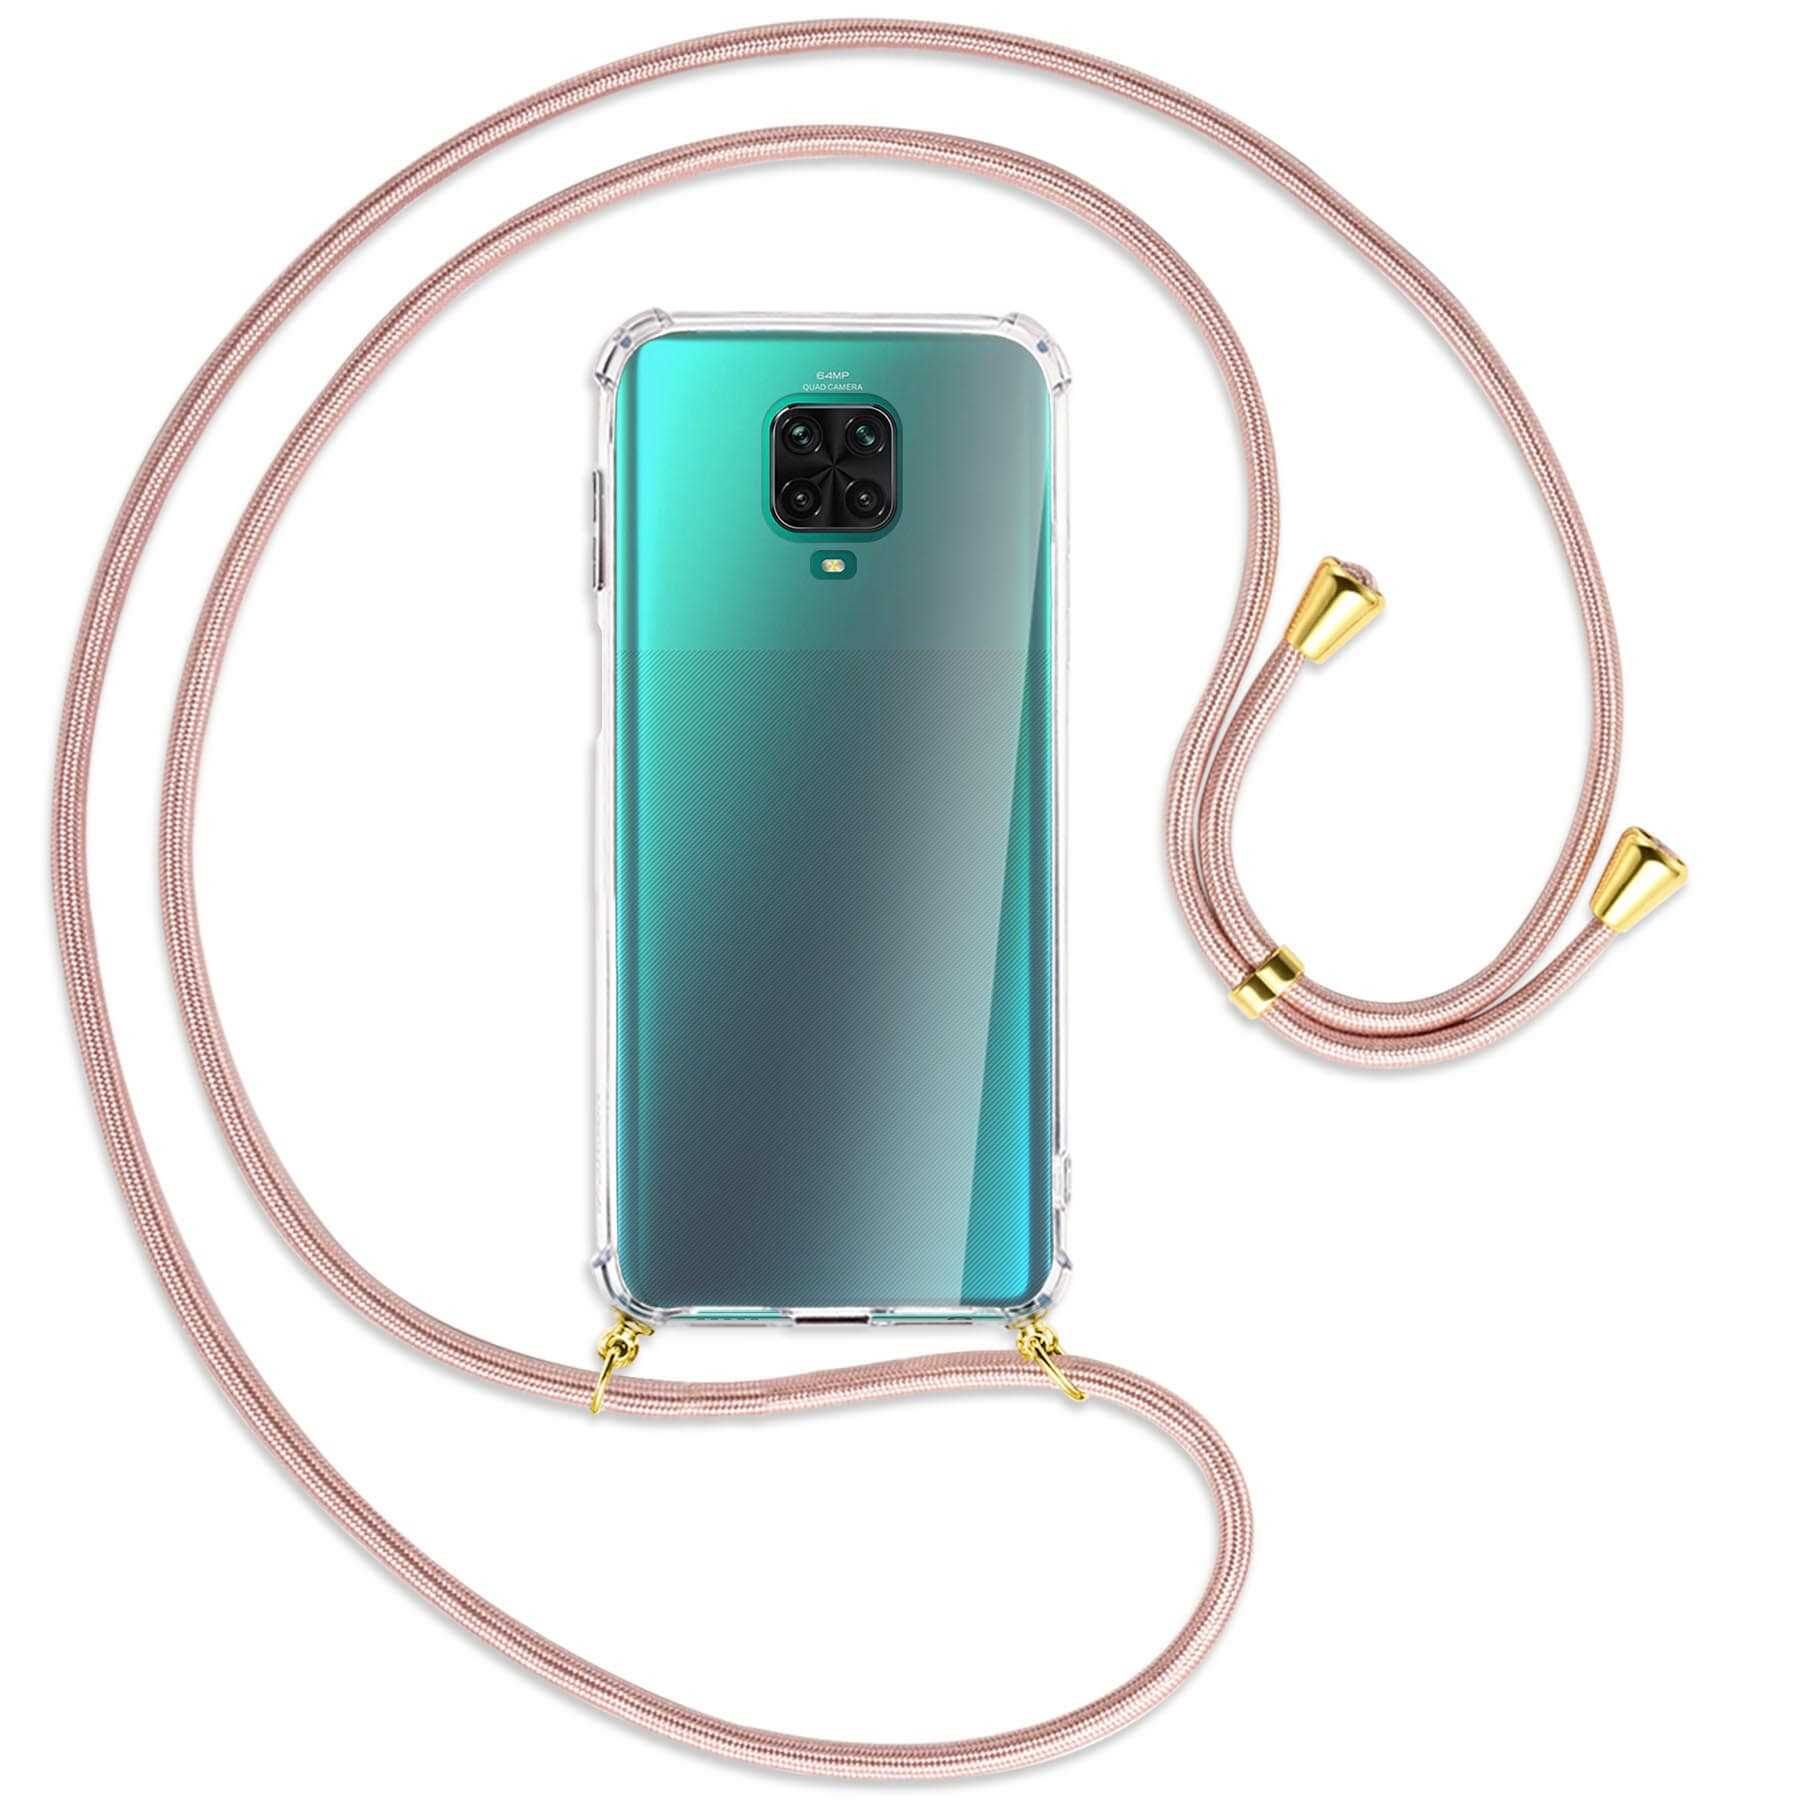 9 9S, mit Redmi MORE Kordel, Rosegold Xiaomi, Redmi Note Gold Backcover, Umhänge-Hülle Note ENERGY / MTB Pro,